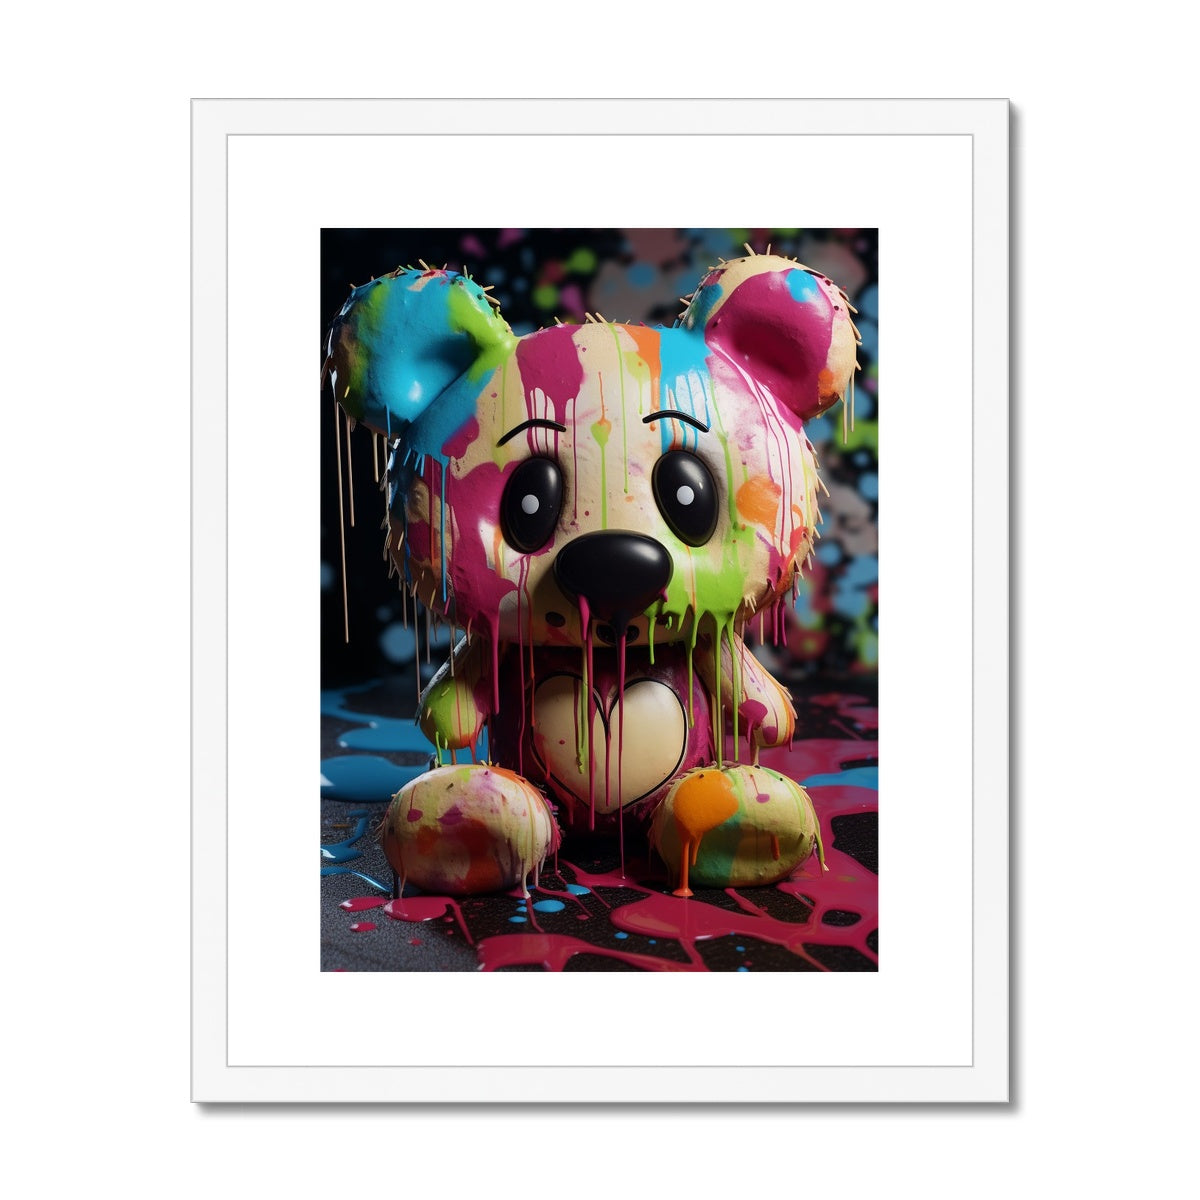 Teddy Edition: Limited Edition Framed & Mounted Print